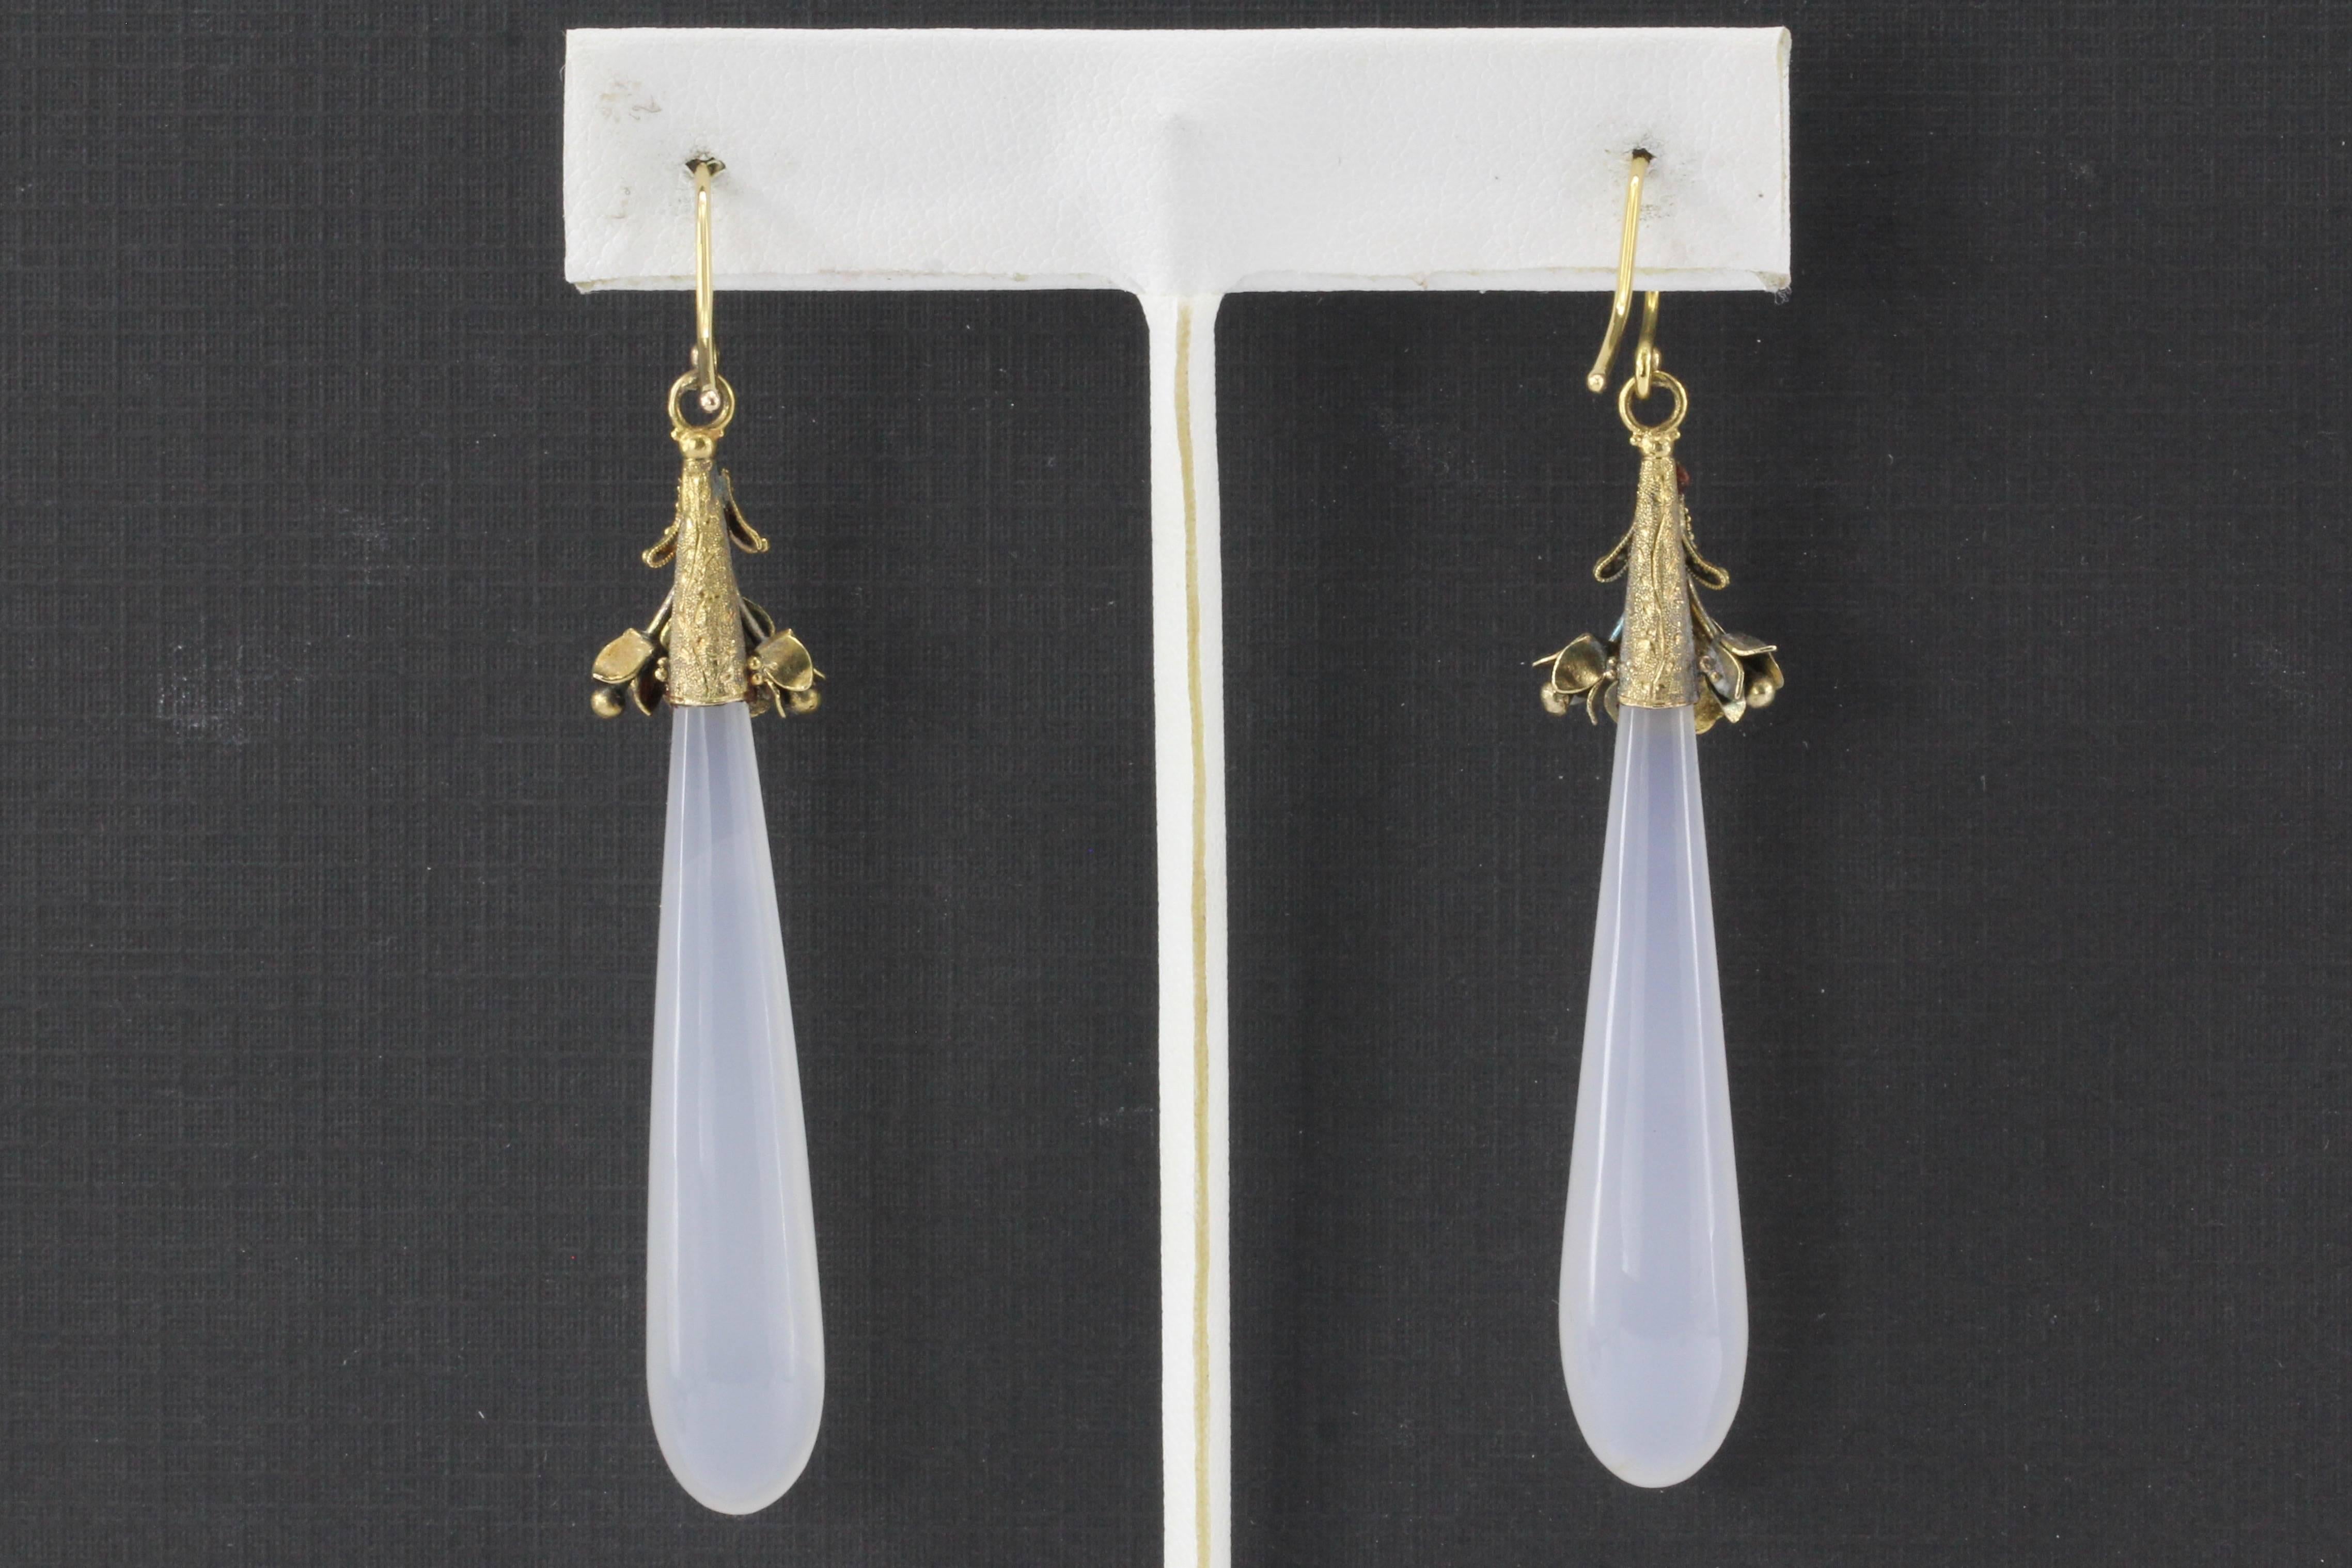 Victorian 15K Gold White Chalcedony Drop Dangle Earrings c.1840's

Era: Victorian c.1840's. The earrings are of English origin.

Composition: 15K Yellow Gold

Primary Stone: White Chalcedony

Earring Measurements: 2.5"  (2.75" w/ hook) x